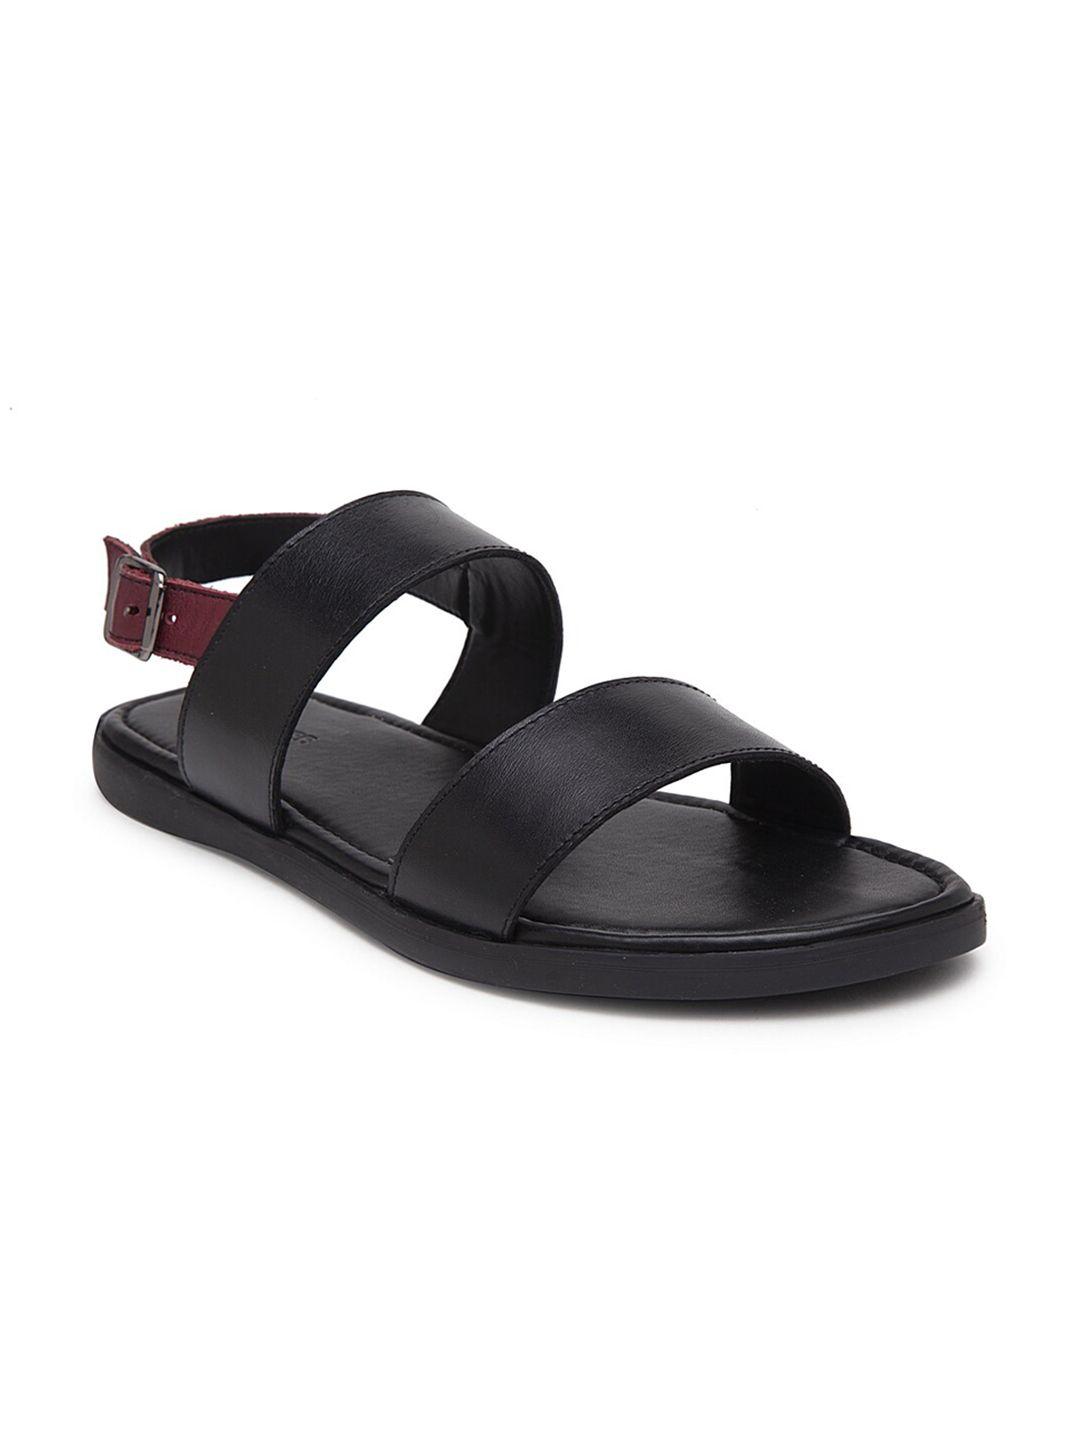 beaver men leather comfort sandals with buckle